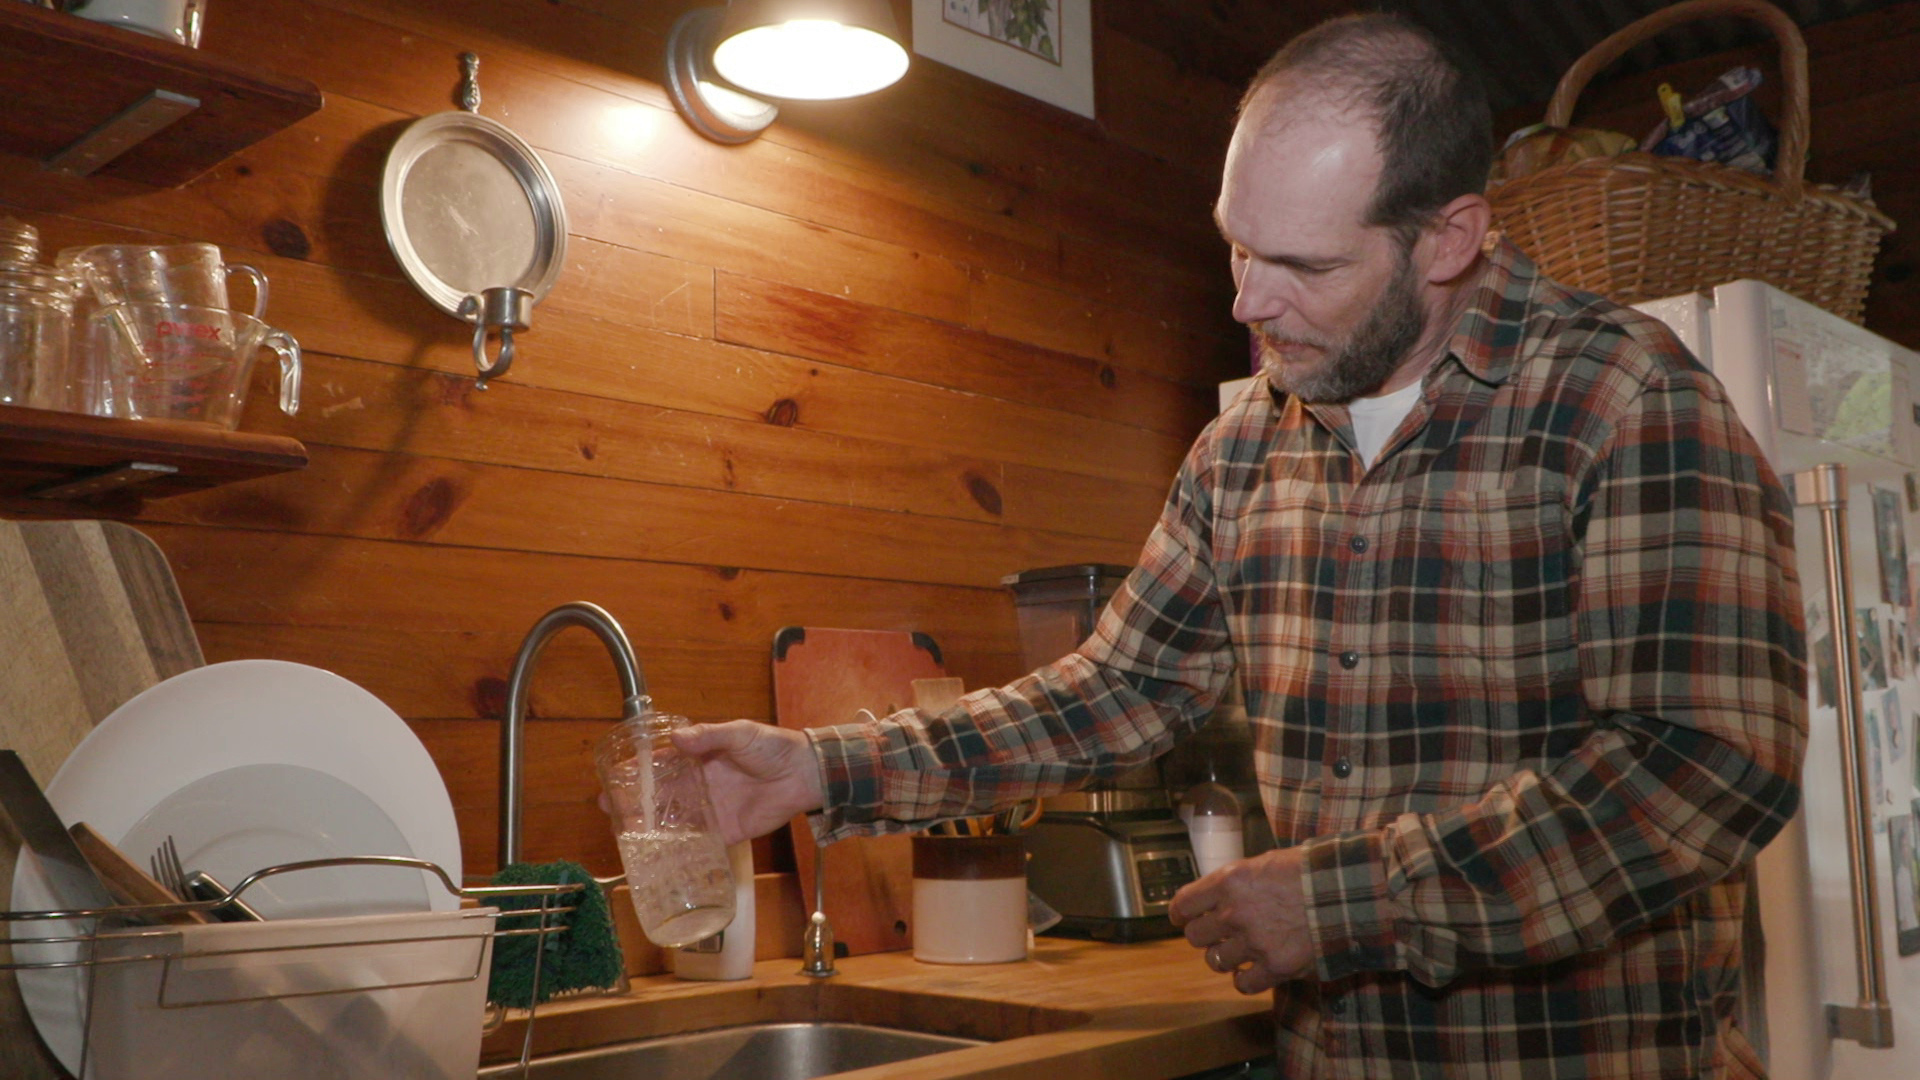 Tarion O'Carroll holds a glass canning jar under a faucet and fills it with water while standing in a kitchen with wood-paneled walls, with shelves and a refrigerator in the background.